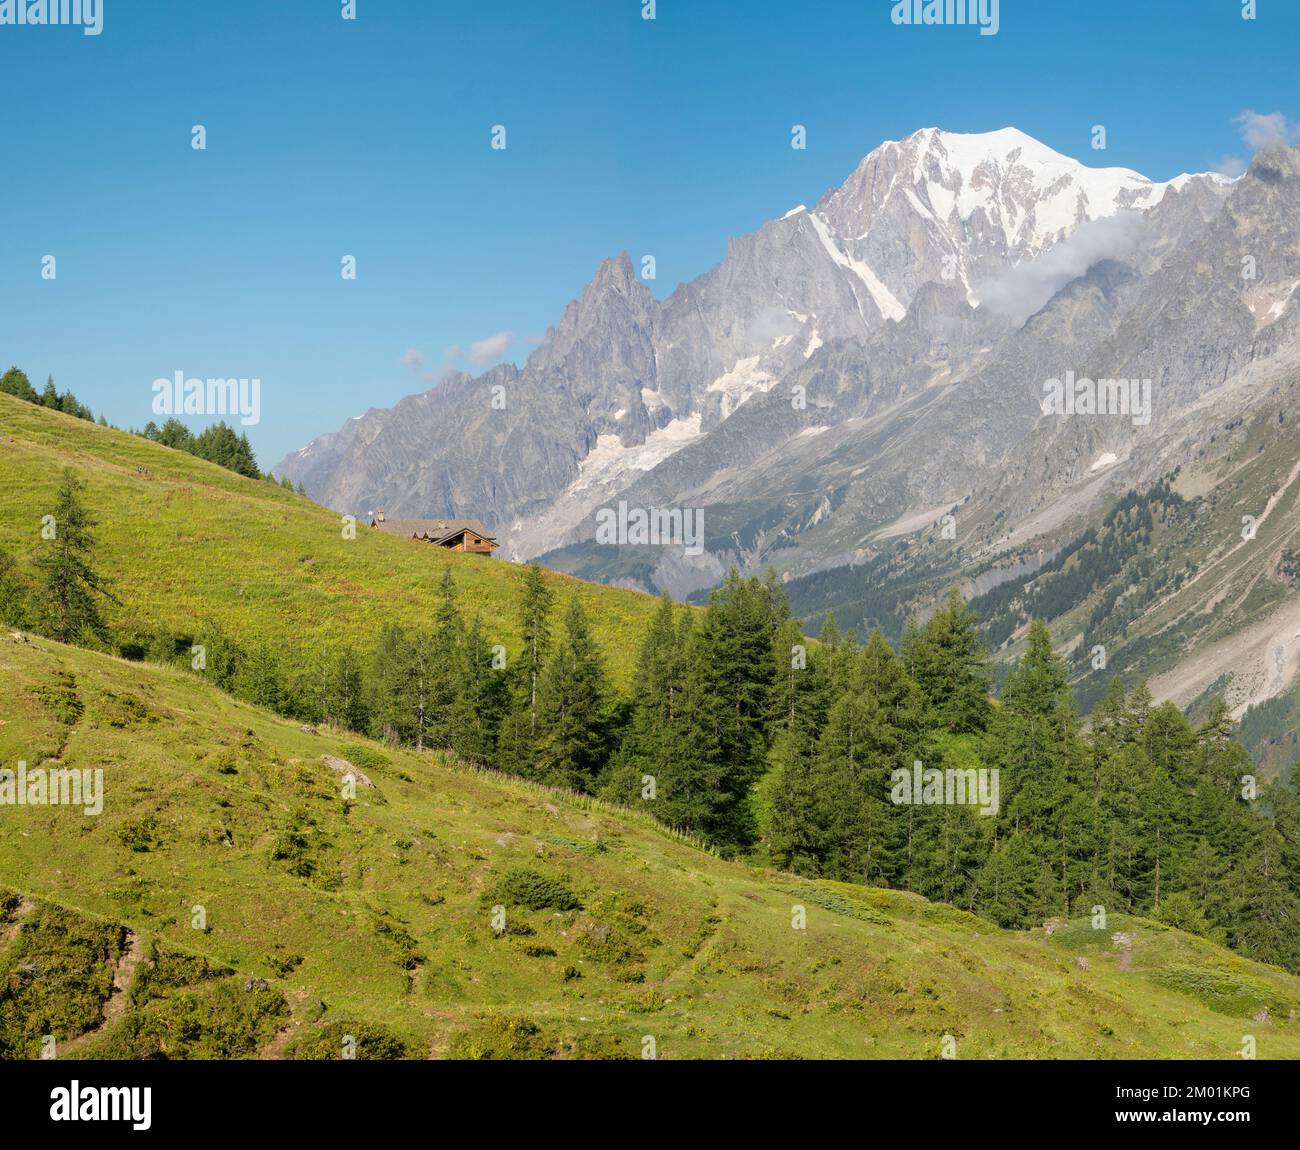 The Mont Blanc massif from Val Ferret valley in Italy. Stock Photo